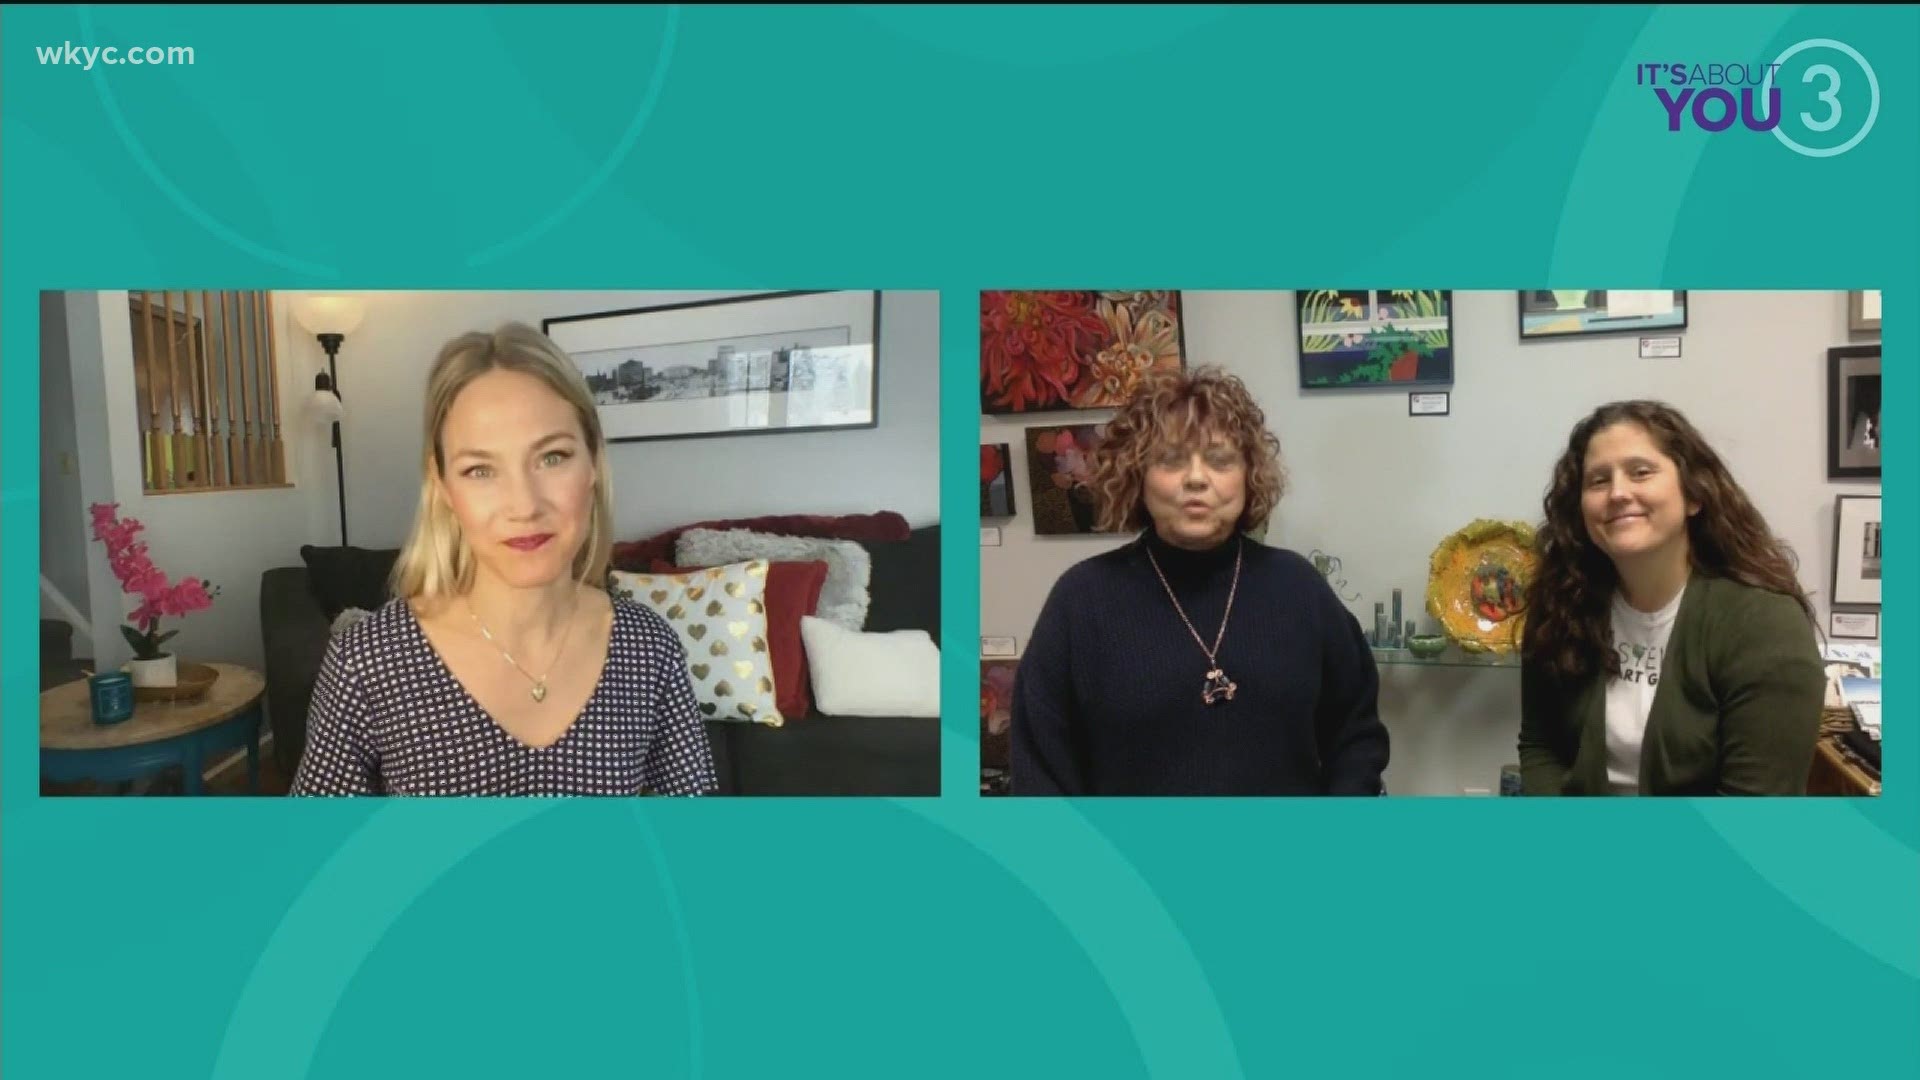 Alexa talks with the mother-daughter duo, Carol Pitts and Dani Klein, about Stella's Art Gallery and art therapy.